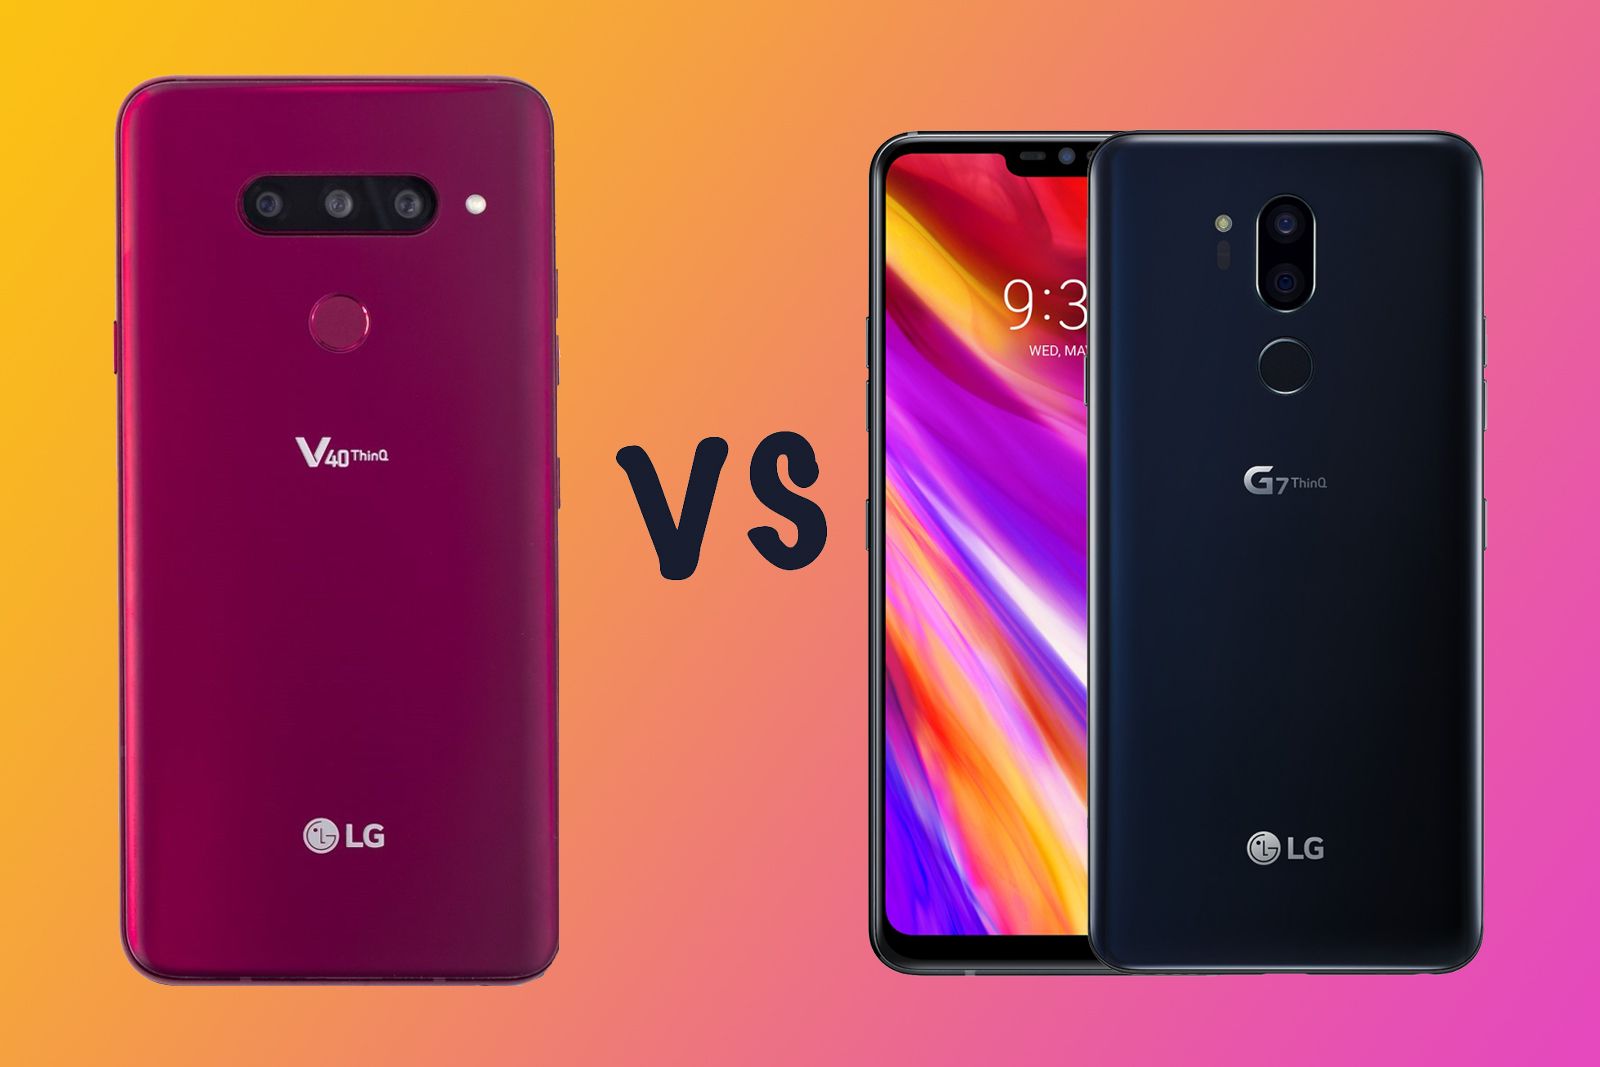 LG V40 vs LG G7 ThinQ Whats the difference image 1